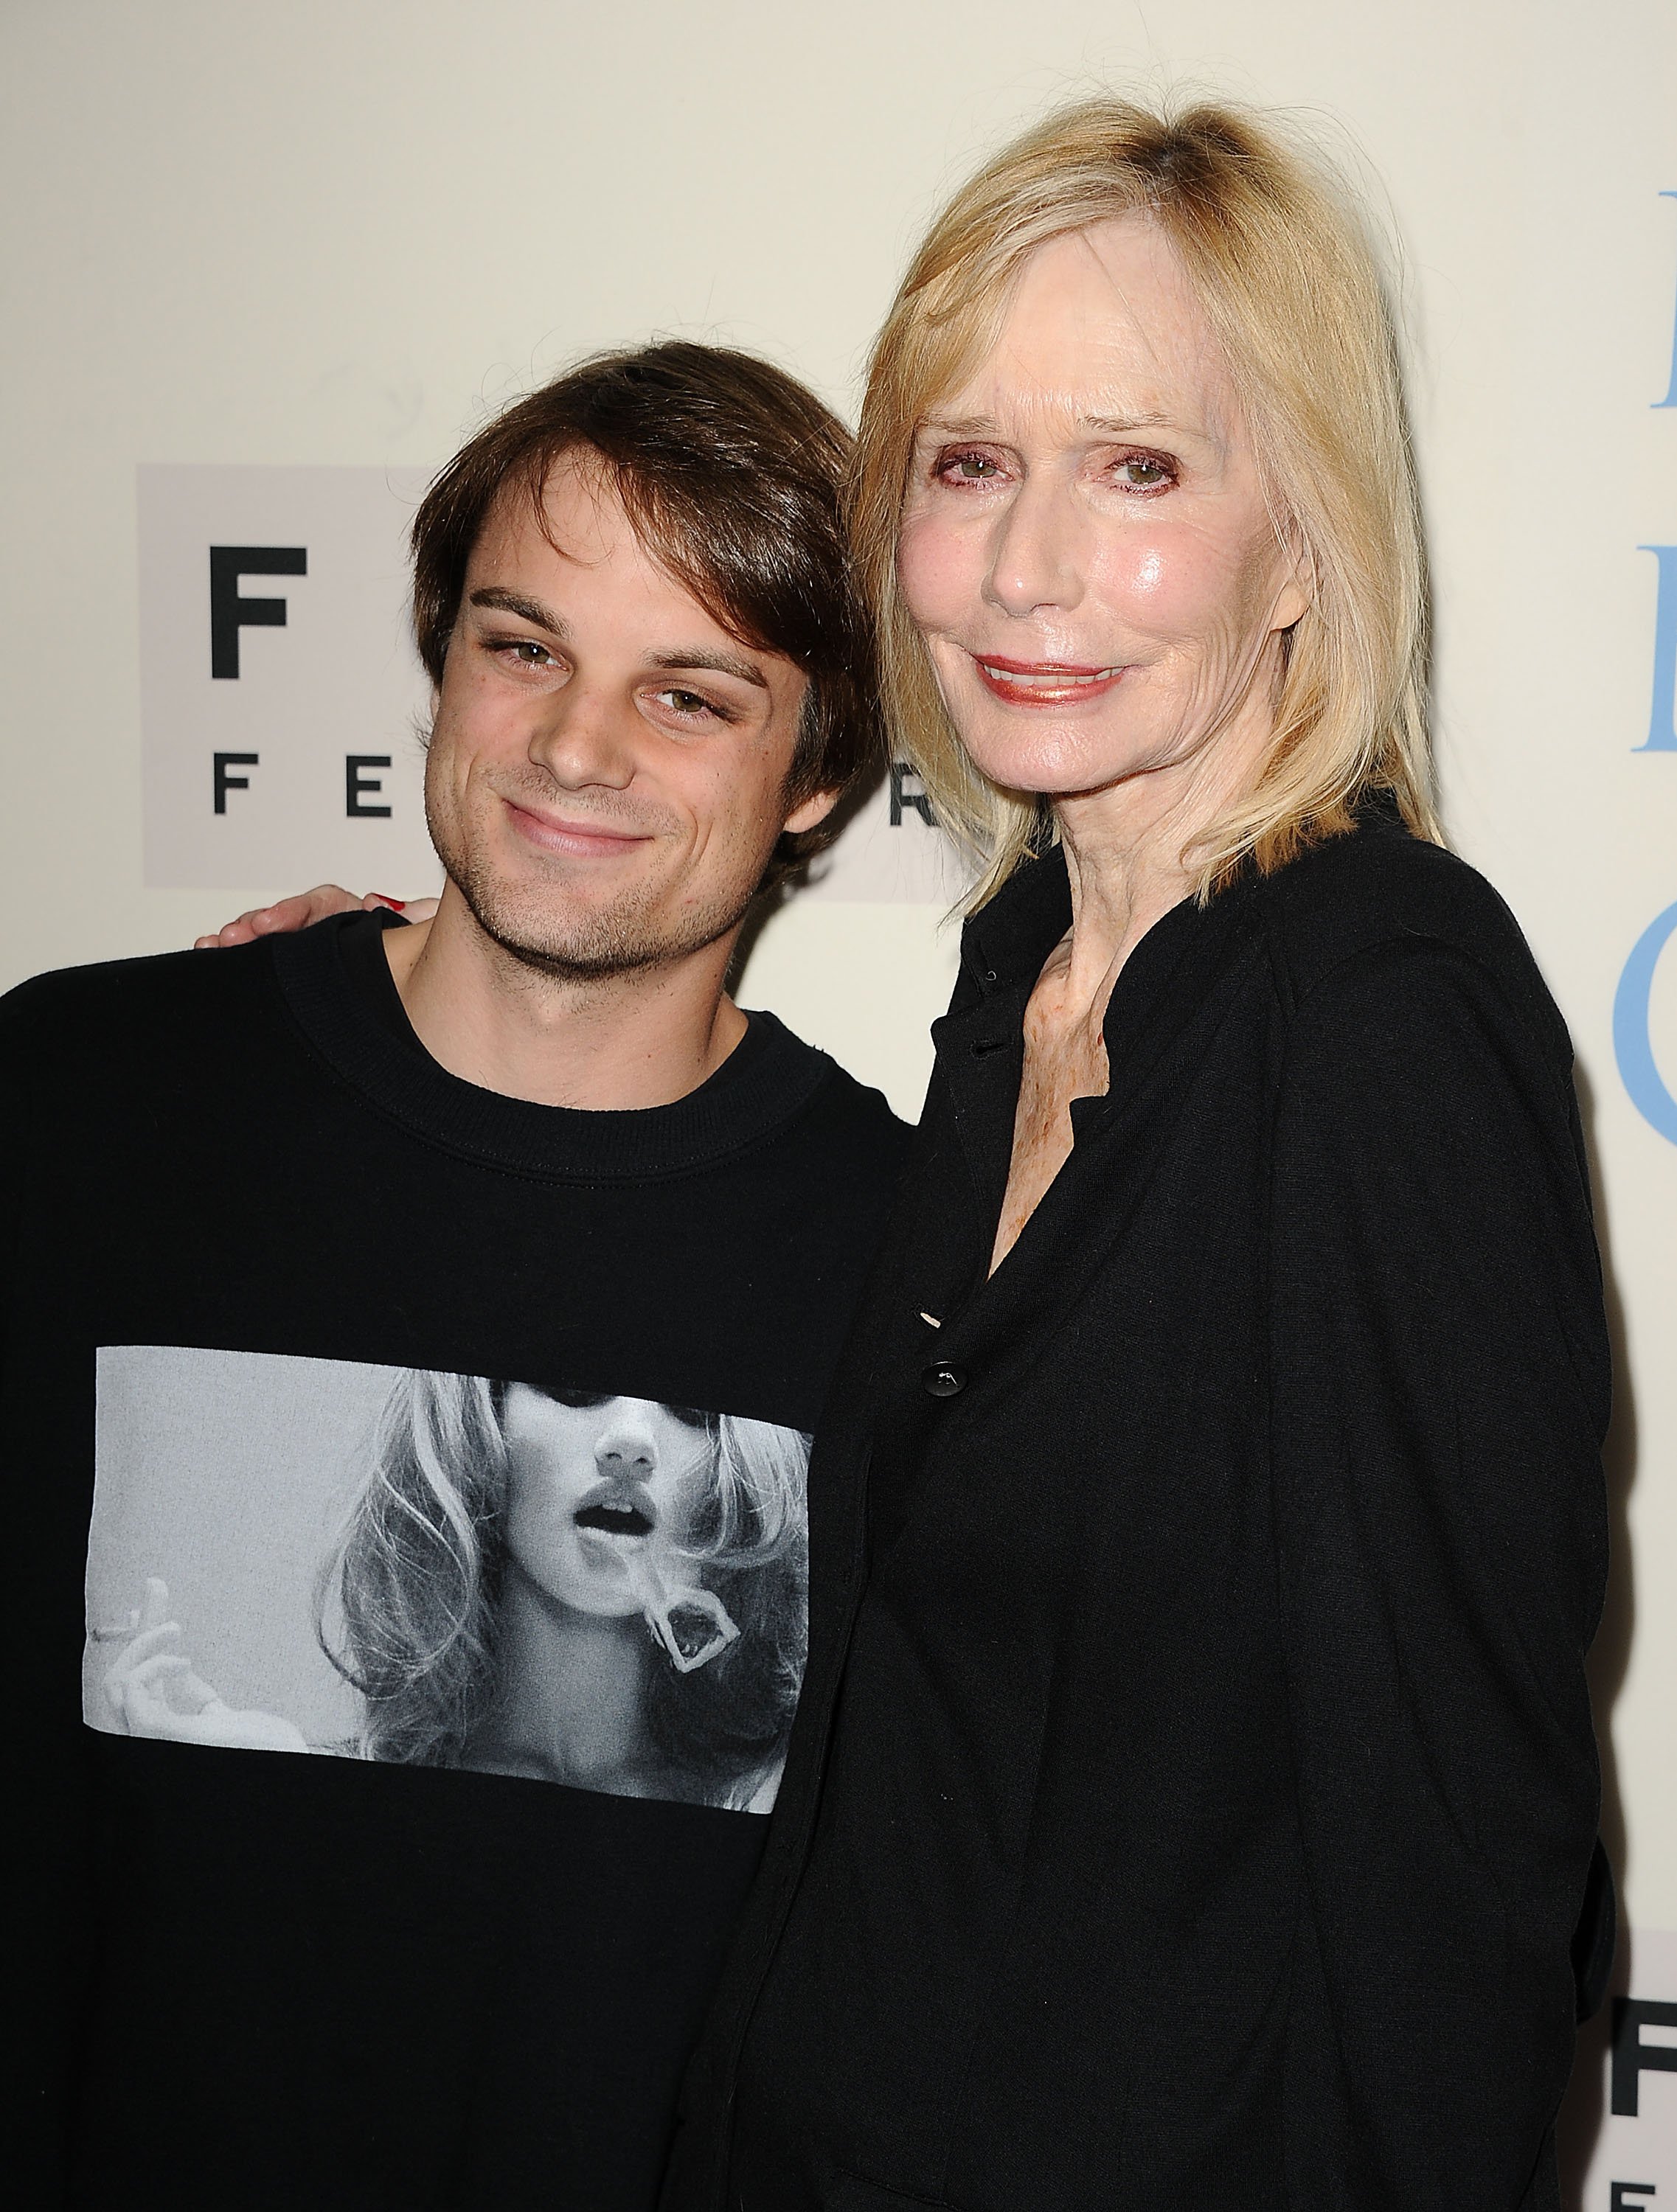 Sally Kellerman and son, Jack, at the premiere of "Dallas Buyers Club" on October 17, 2013 | Source: Getty Images